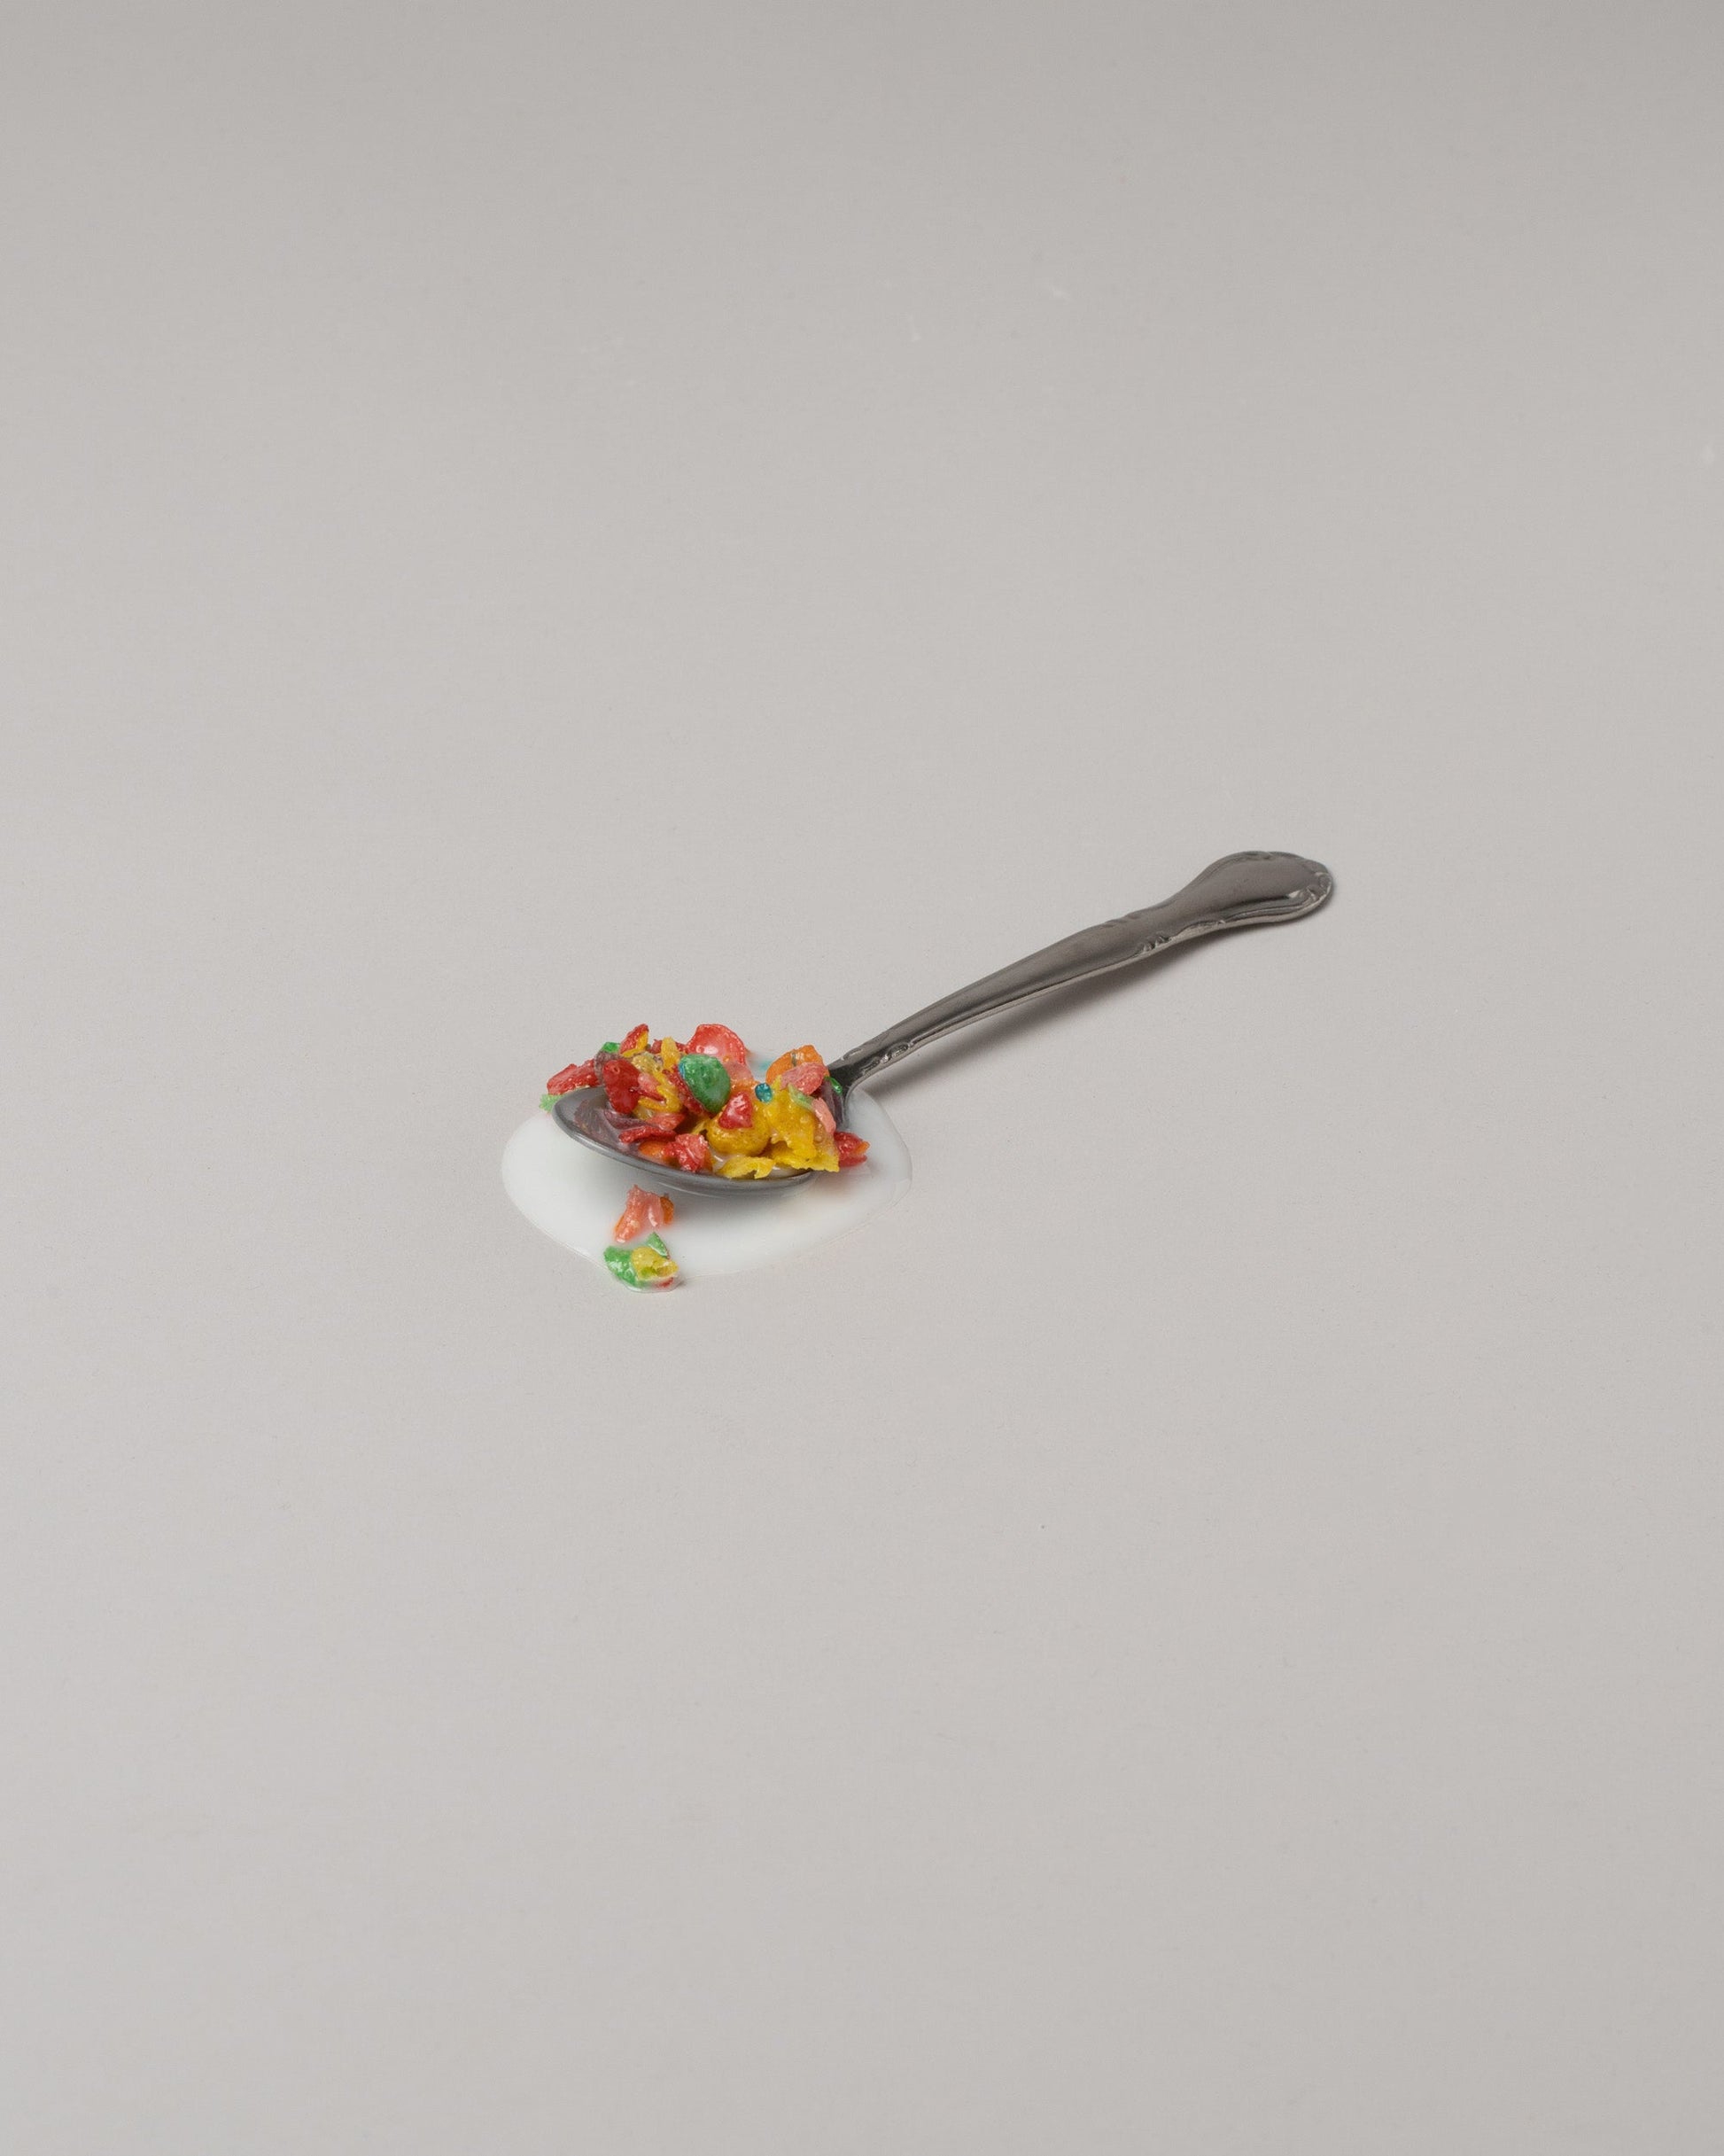 Spills Fruity Pebbles Spoon on light color background.